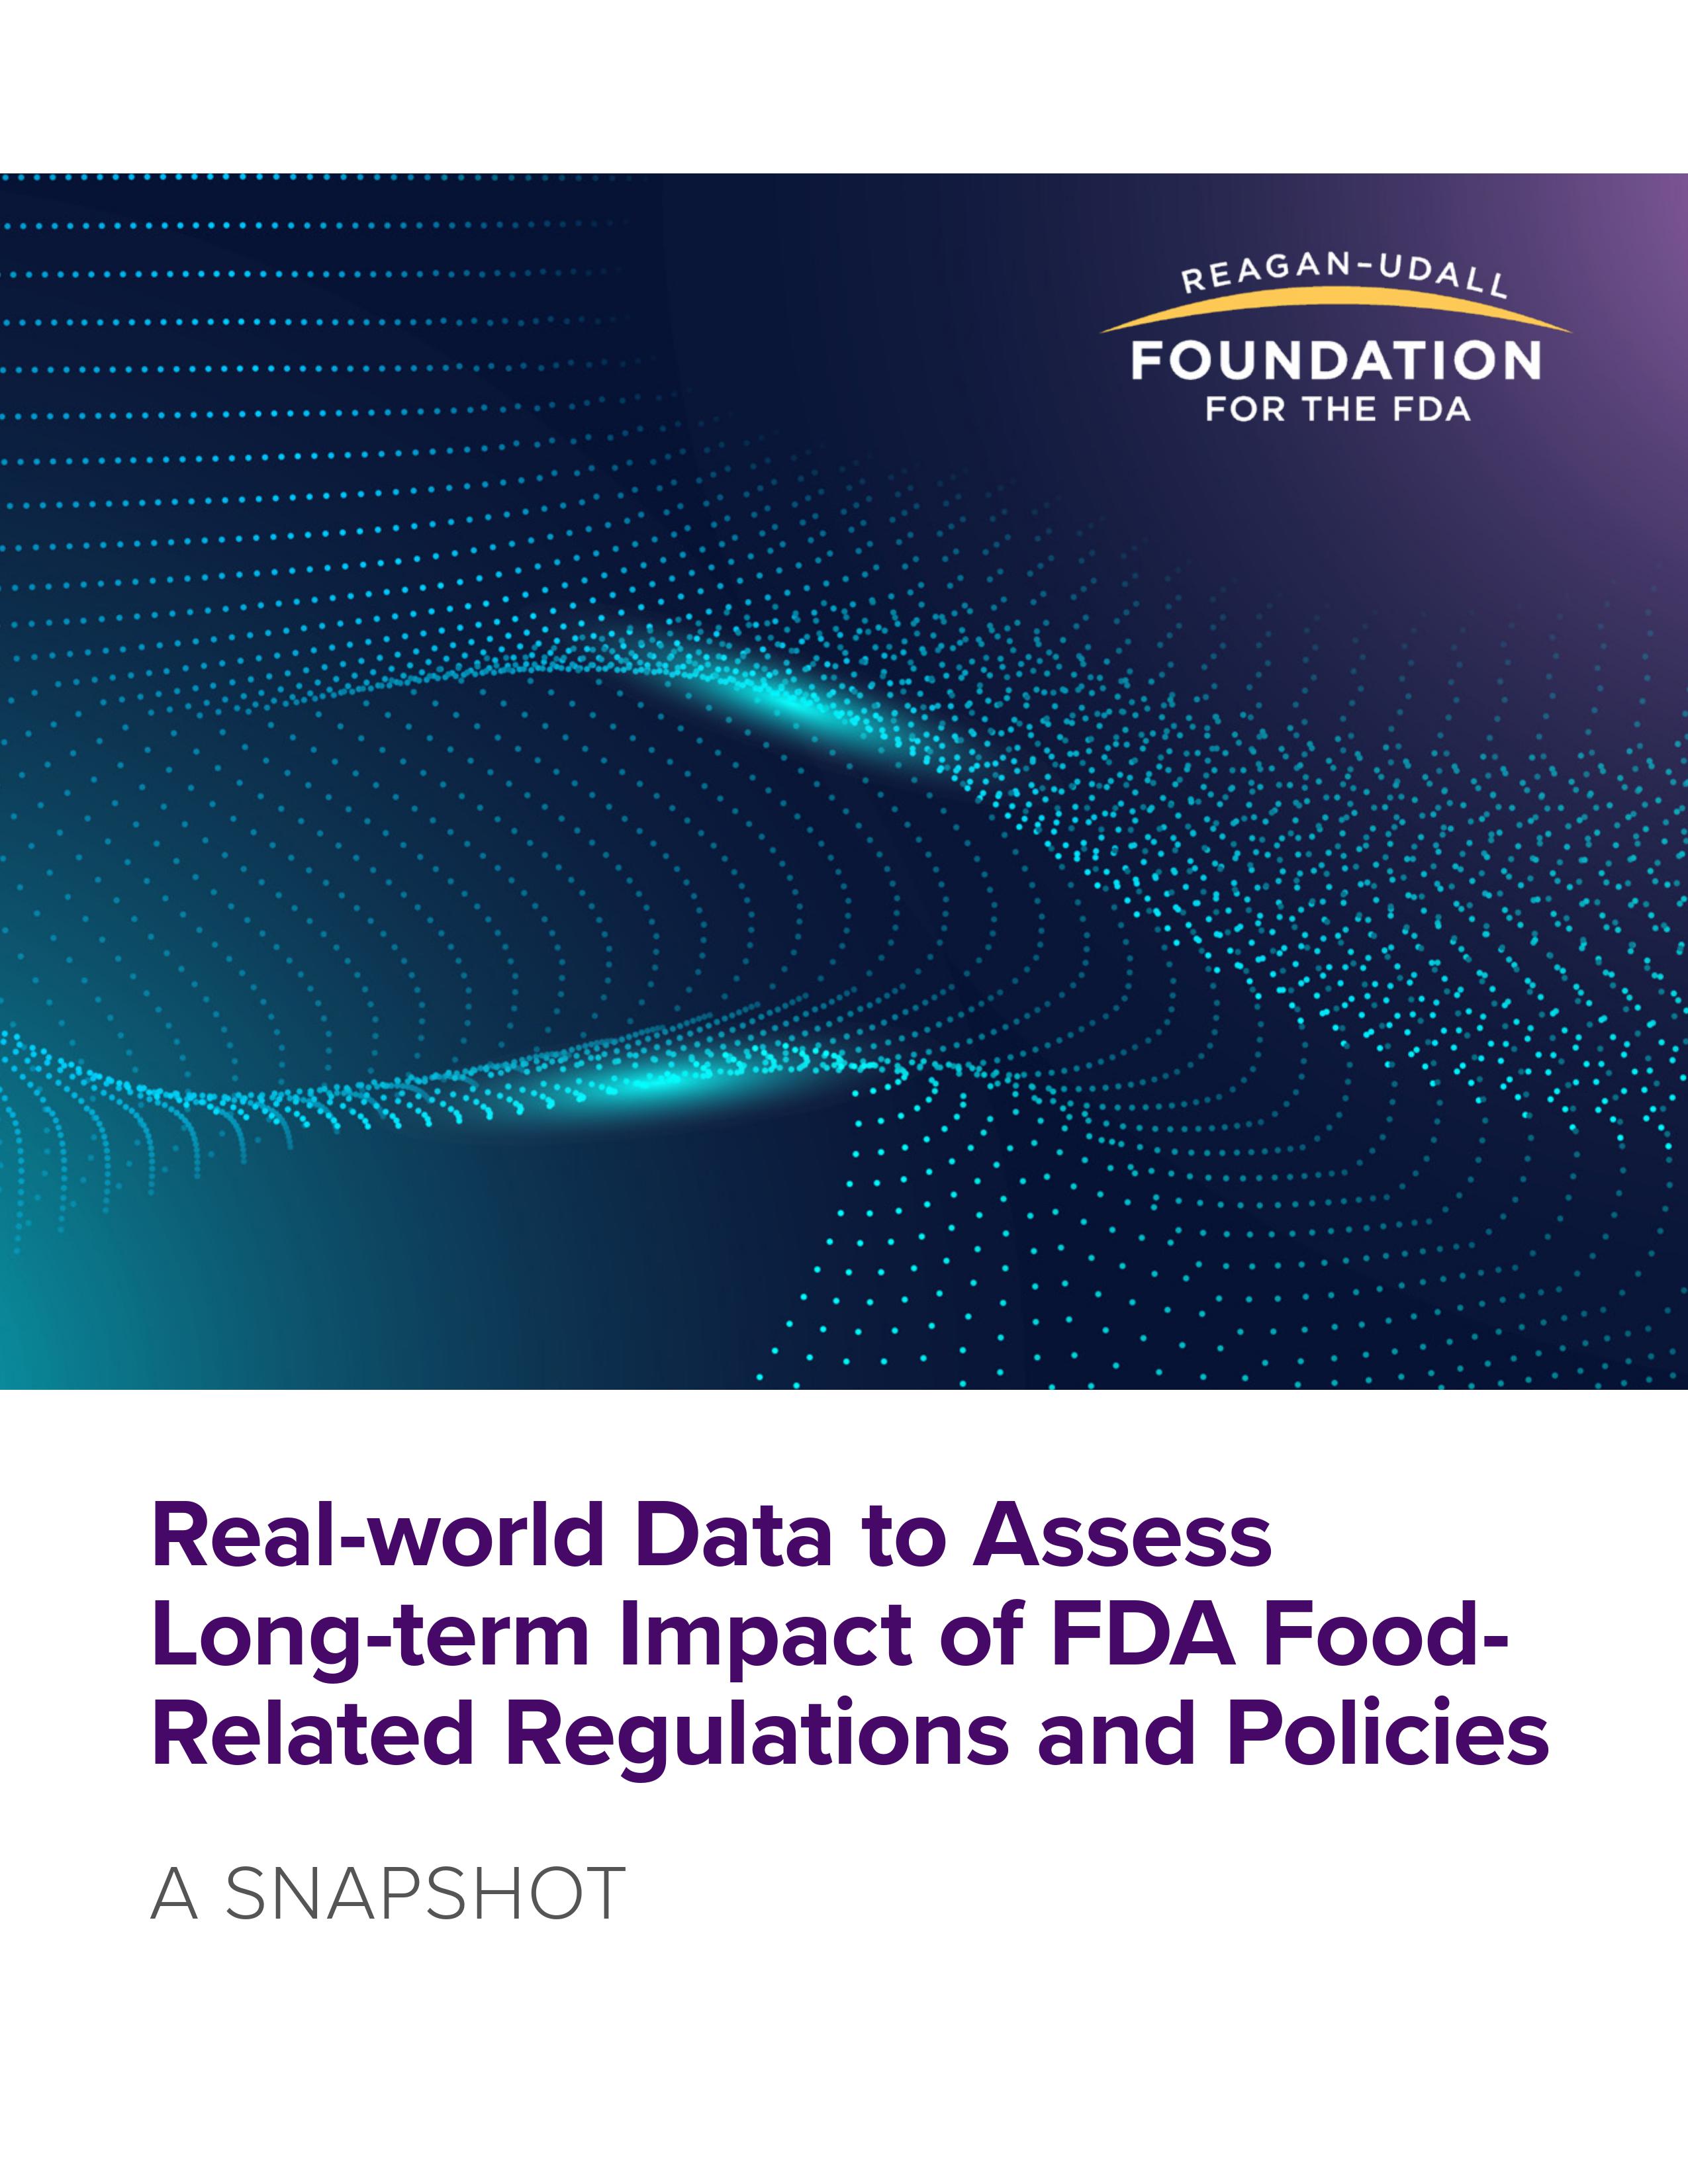 Real-world Data to Assess Long-term Impact of FDA Food-related Regulations and Policies